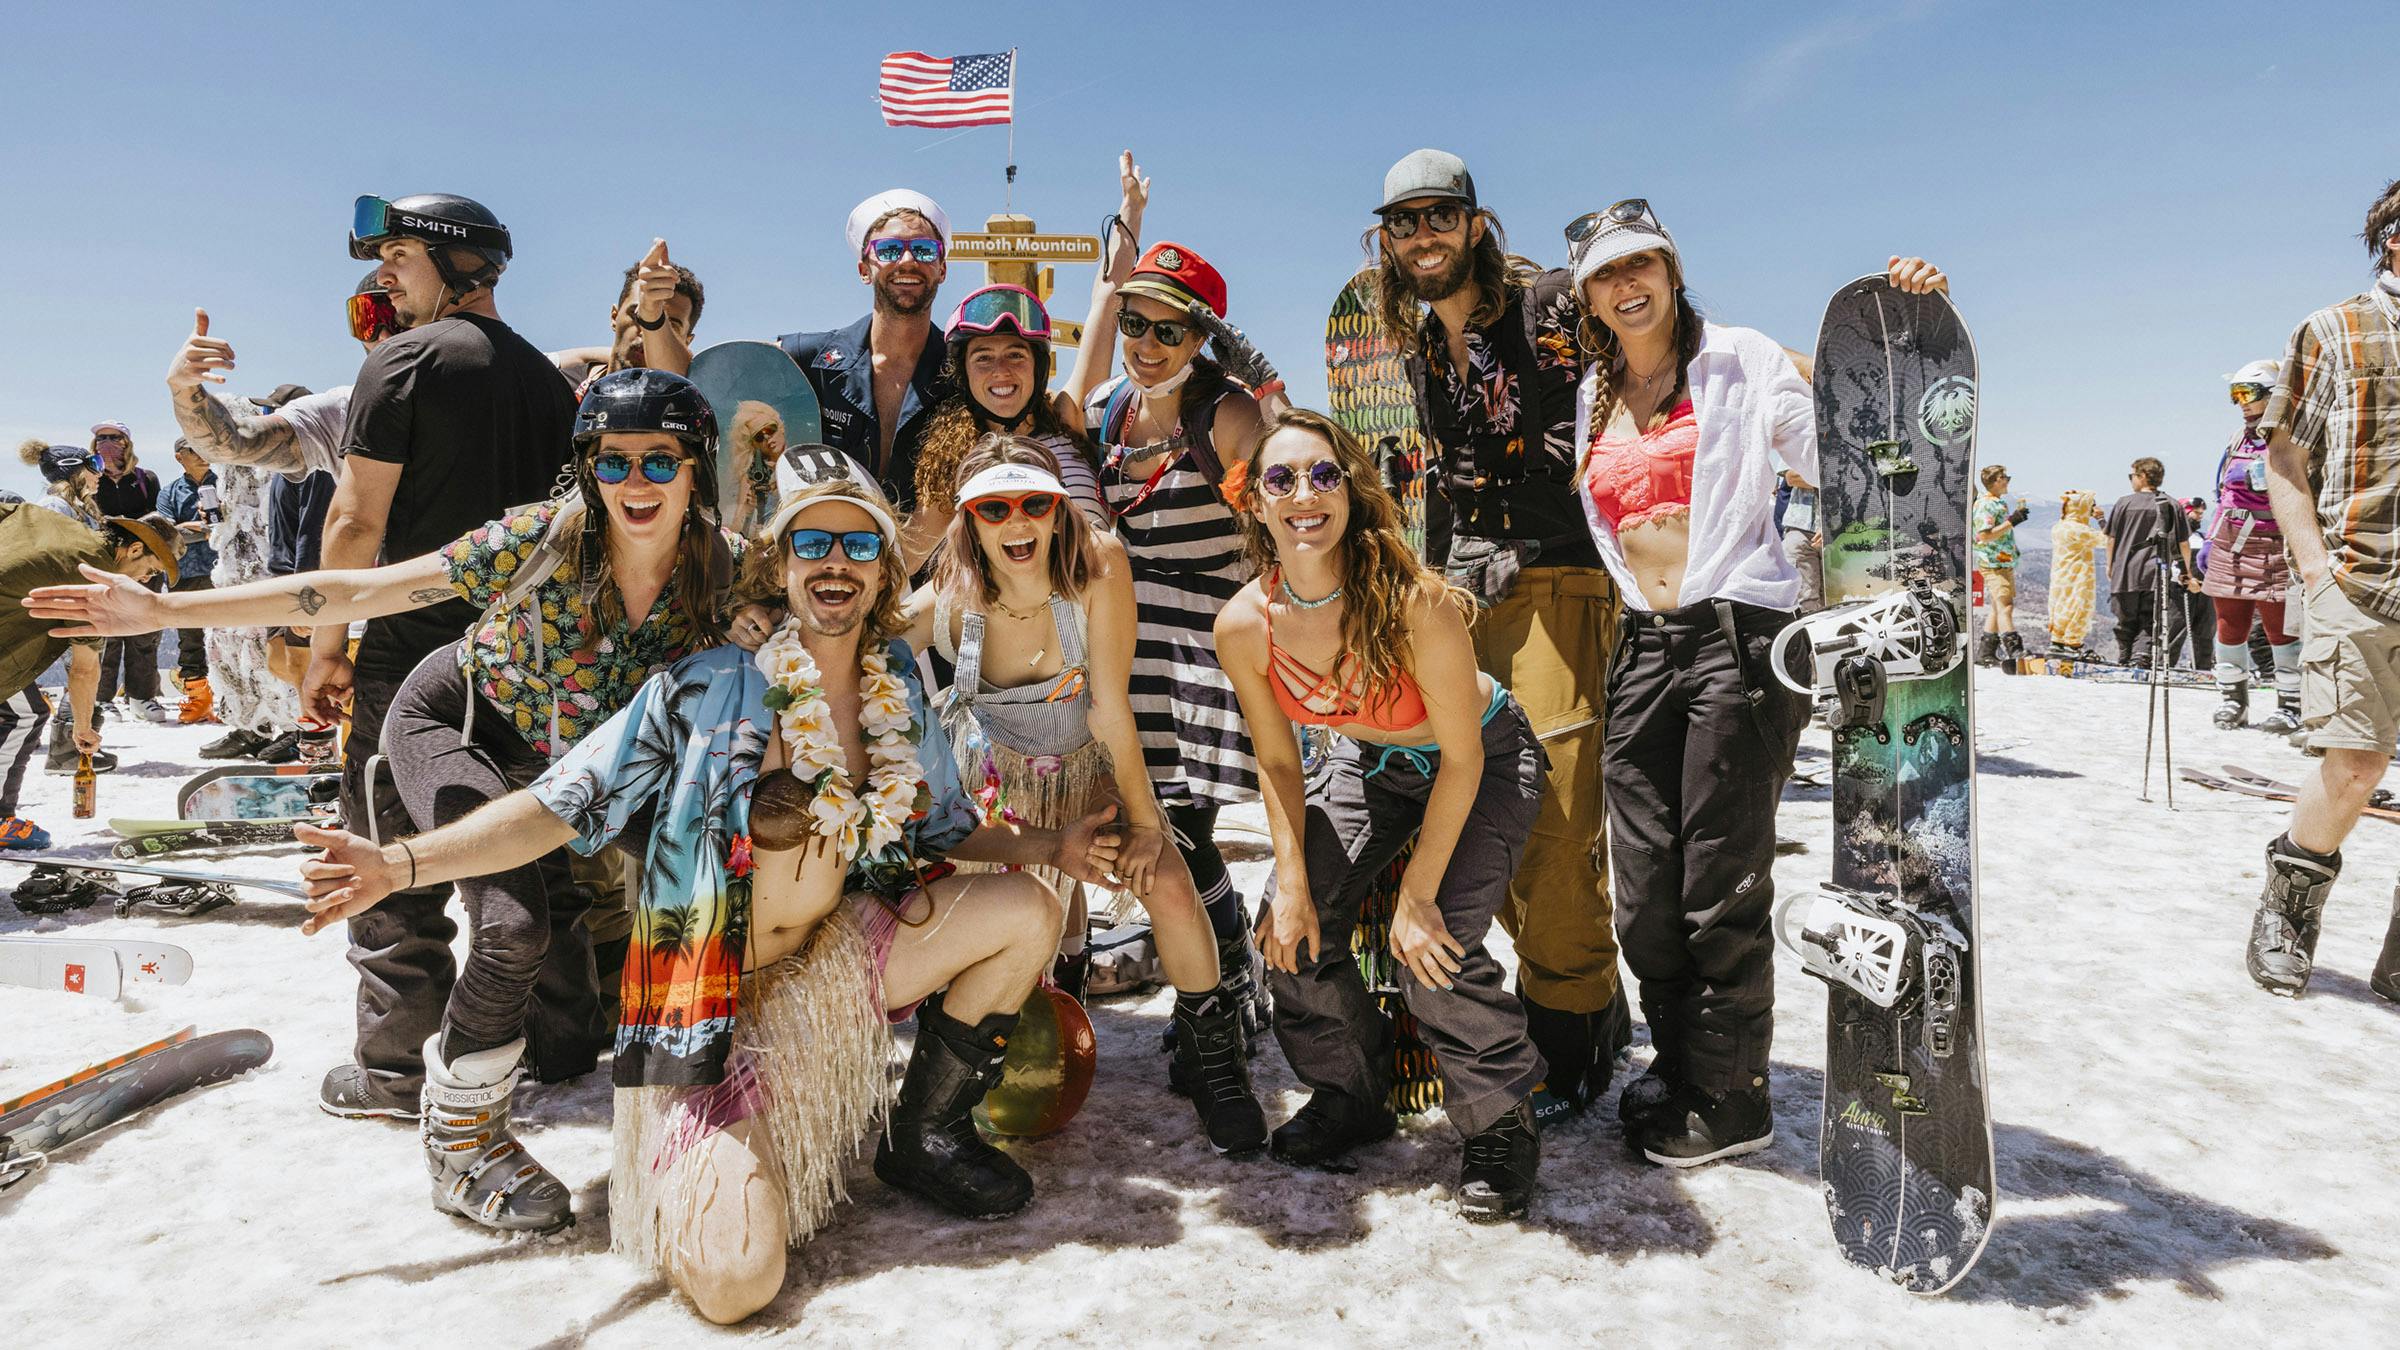 Group of friends posing for a photo at summit of Mammoth Mountain in summer attire for Mammoth Yacht Club